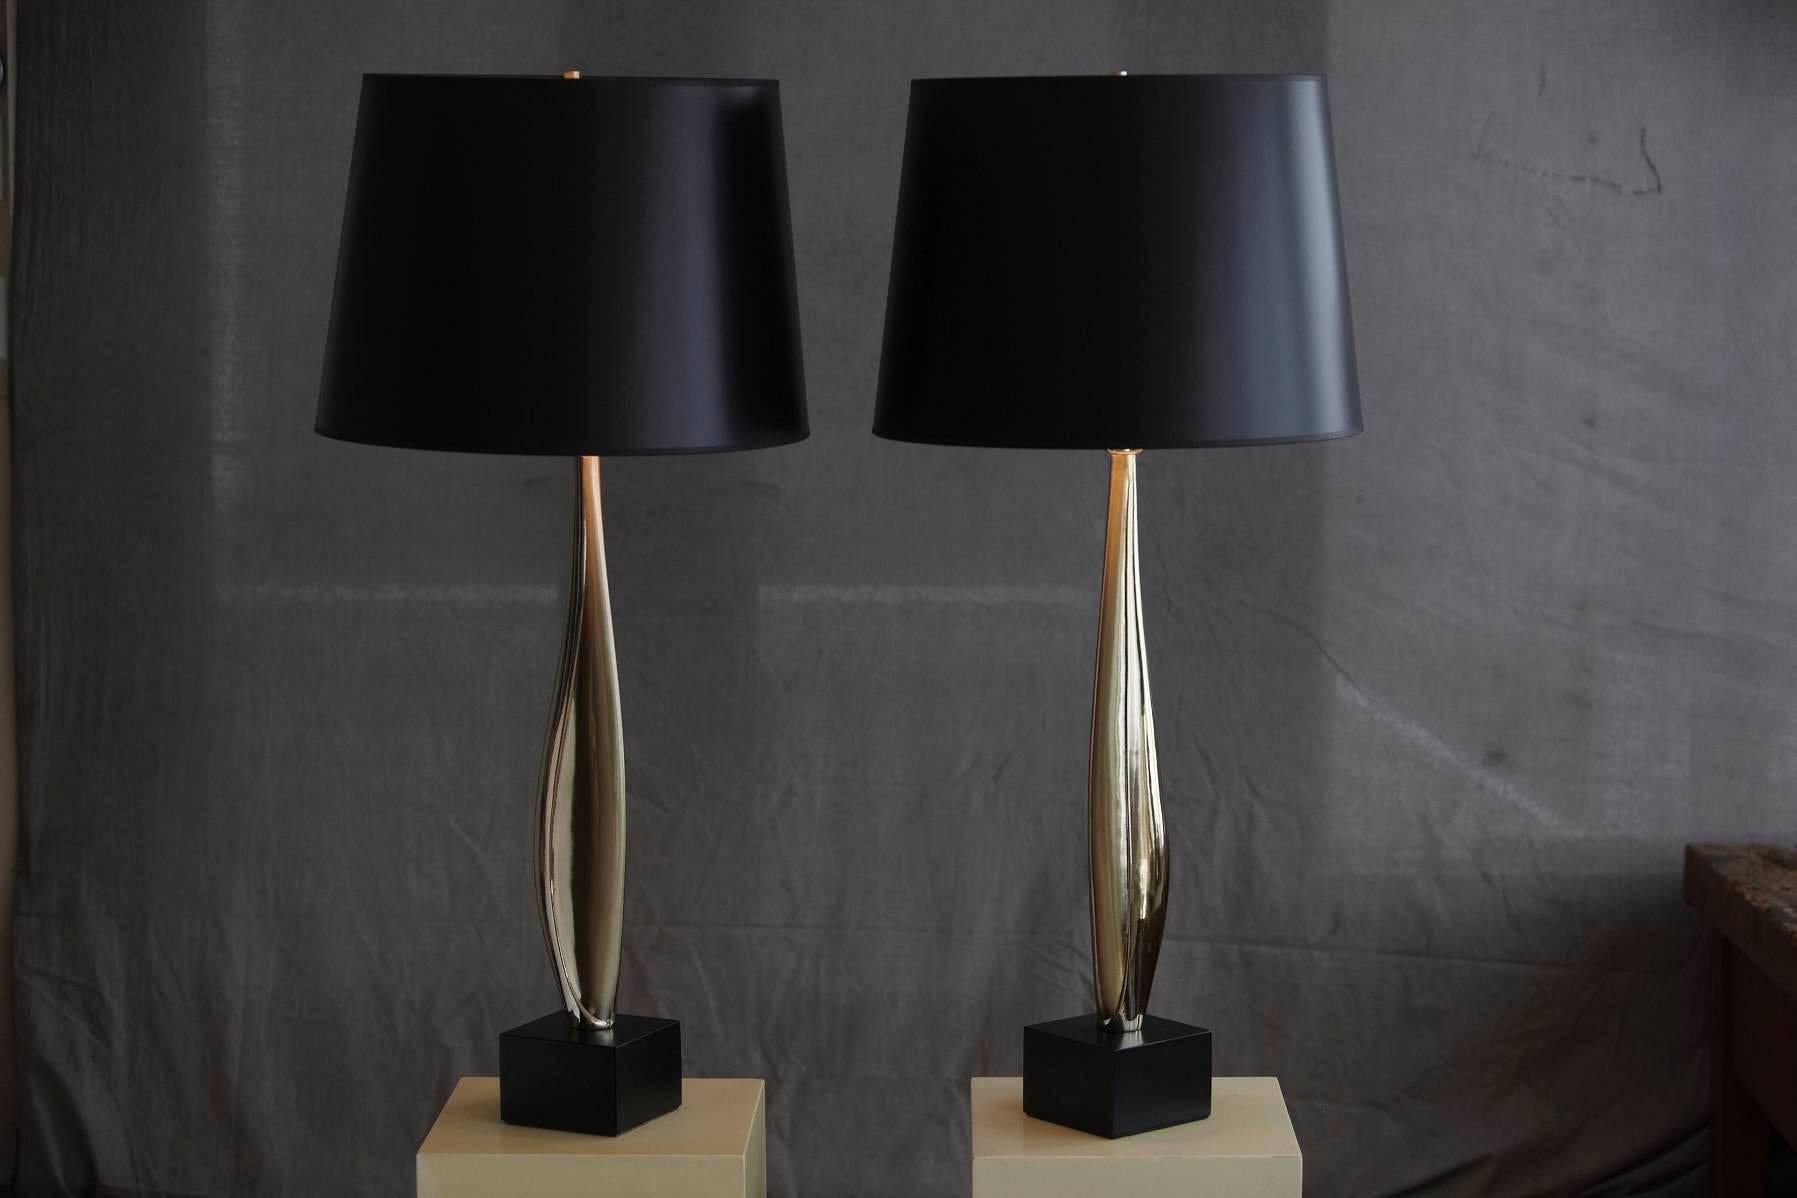 Pair of tall, sleek, sculptural chrome table lamps on a black lacquered base, attributed to Maurizio Tempestini.
The lamps come with brand new black shades.
Dimensions: Base 5" x 5" / Height to socket 27" / Height to finial 39"